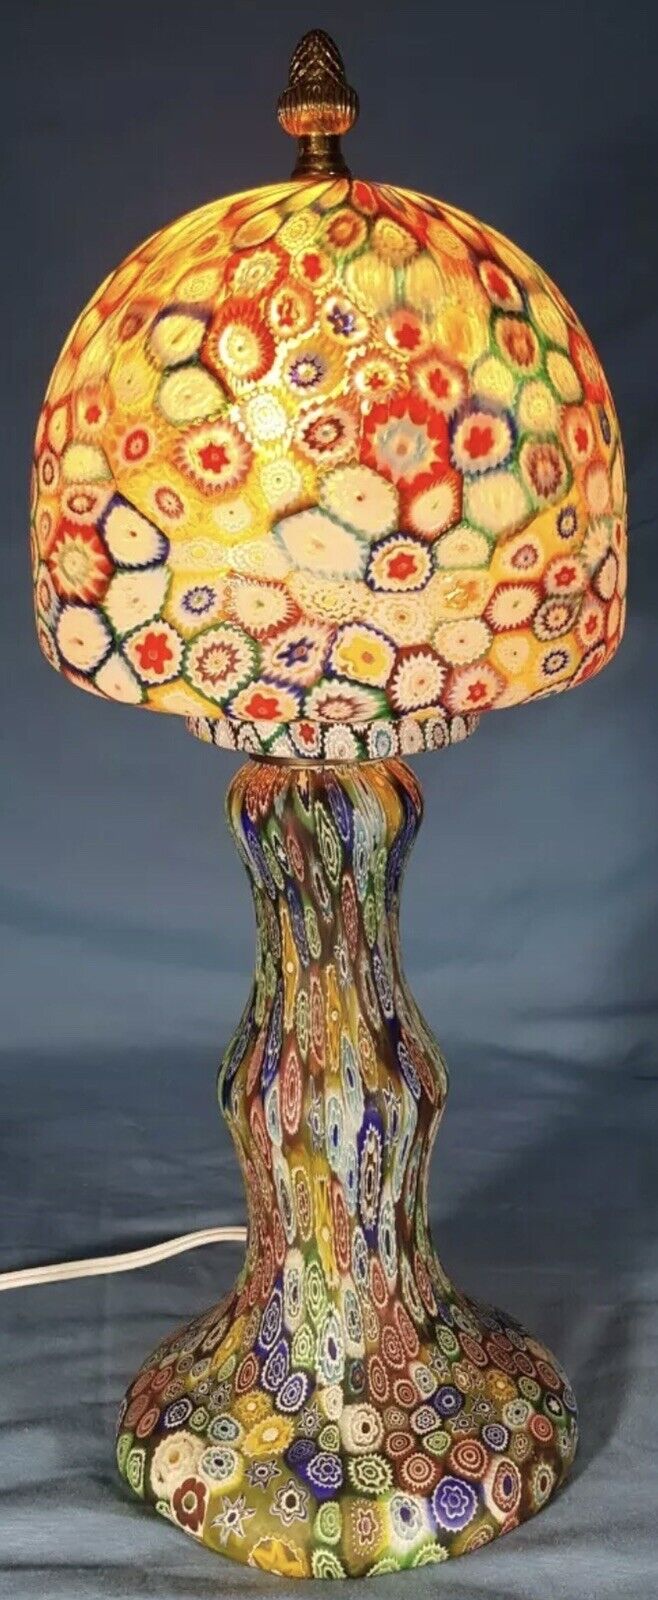 MURANO ART GLASS MILLEFIORI LAMP FRATELLI TOSO*One Of A Kind Stunning Piece 15”T